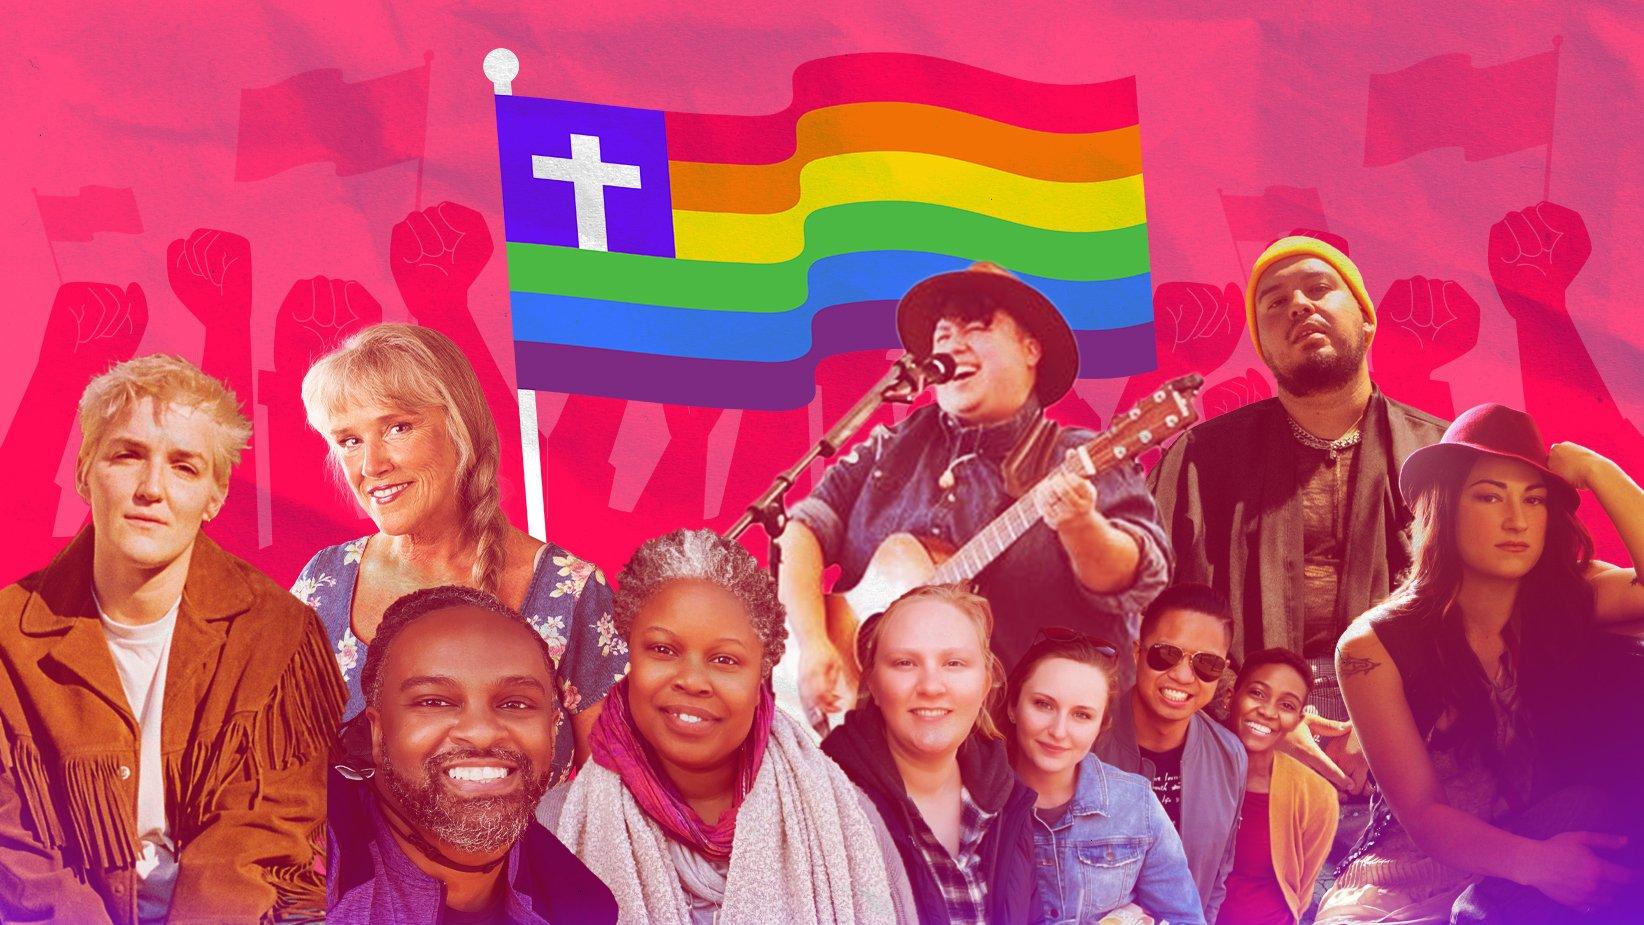 Queer Christian The Faith: How Musicians Are Redefining Music | GRAMMY.com